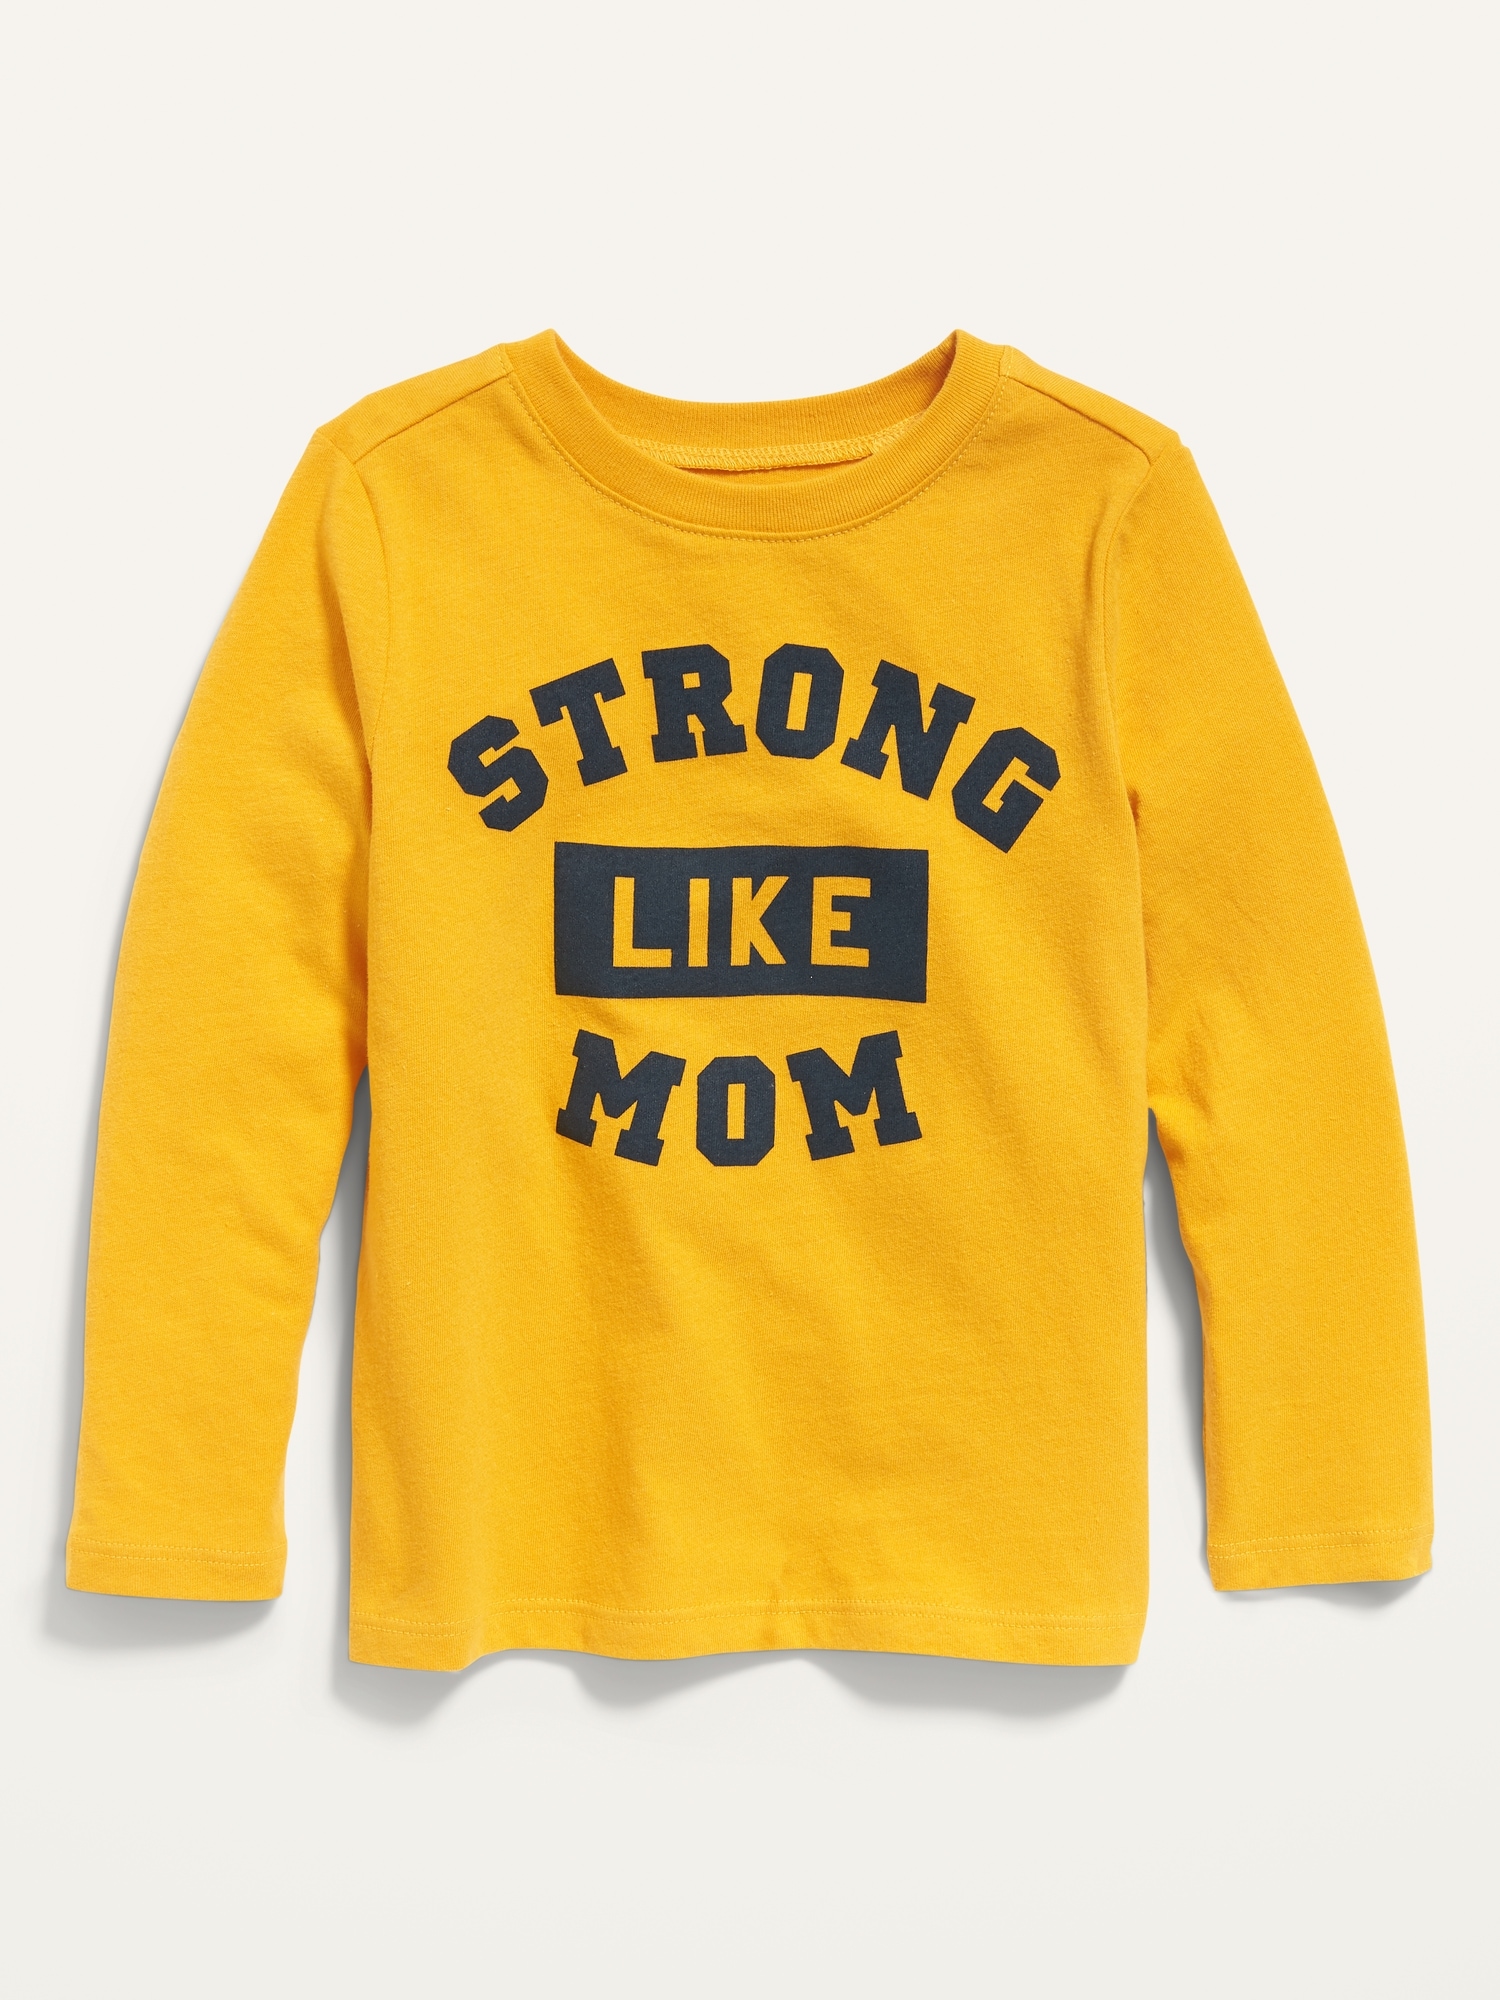 Unisex Graphic Long-Sleeve Tee for Toddler 